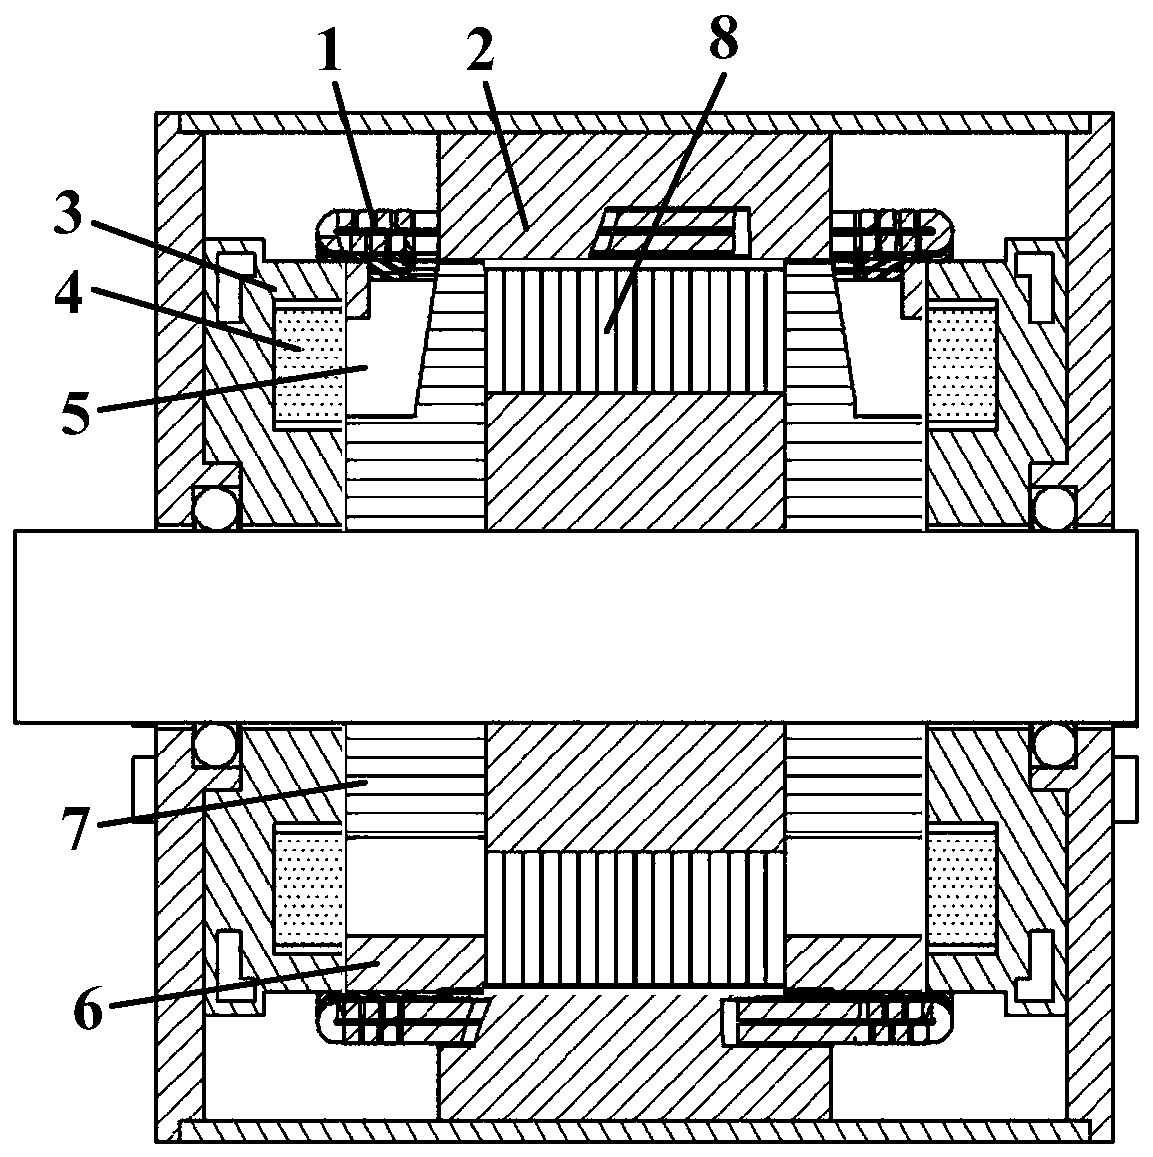 Rotor magnetic circuit decoupling type high-speed hybrid excitation synchronous motor